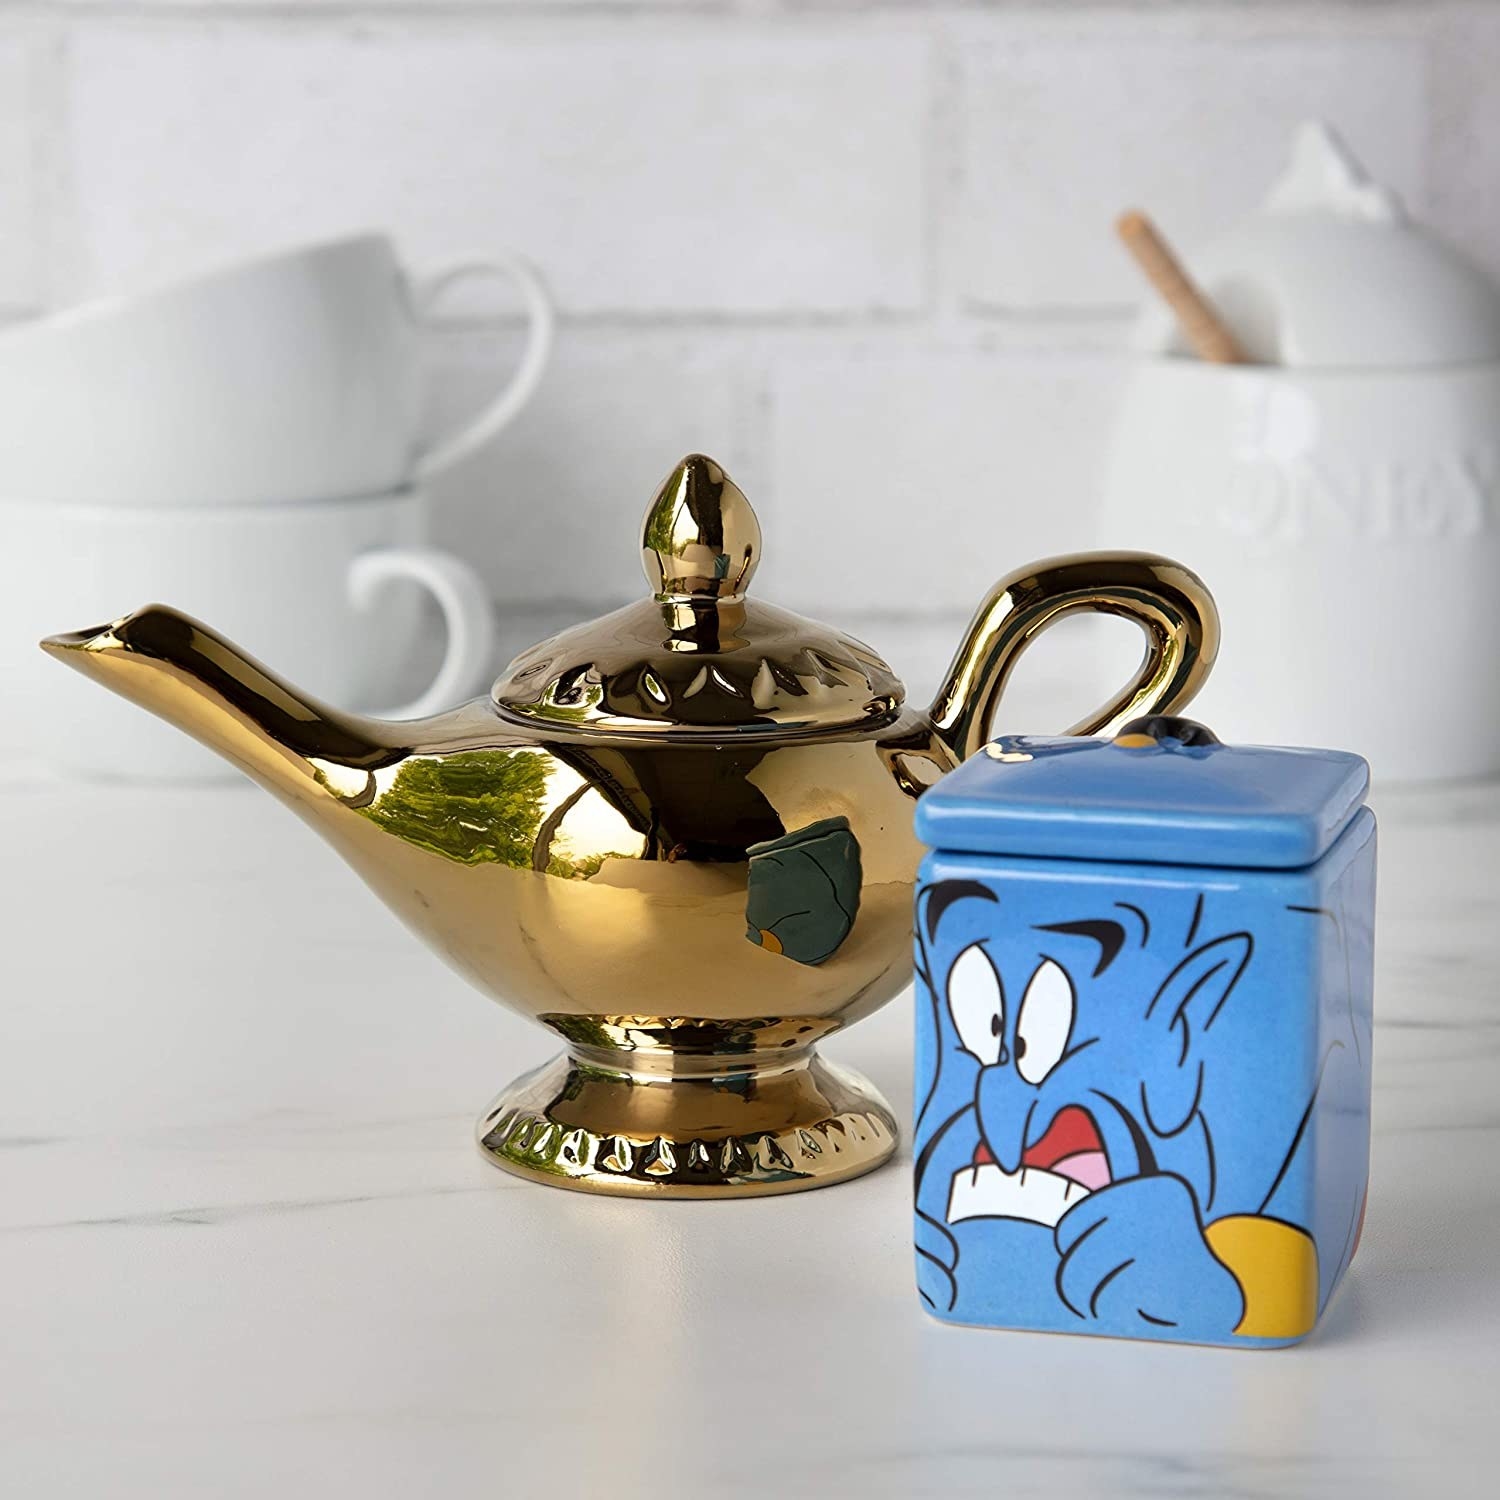 &quot;Aladdin&quot; themed lamp and genie sugar container placed on counter